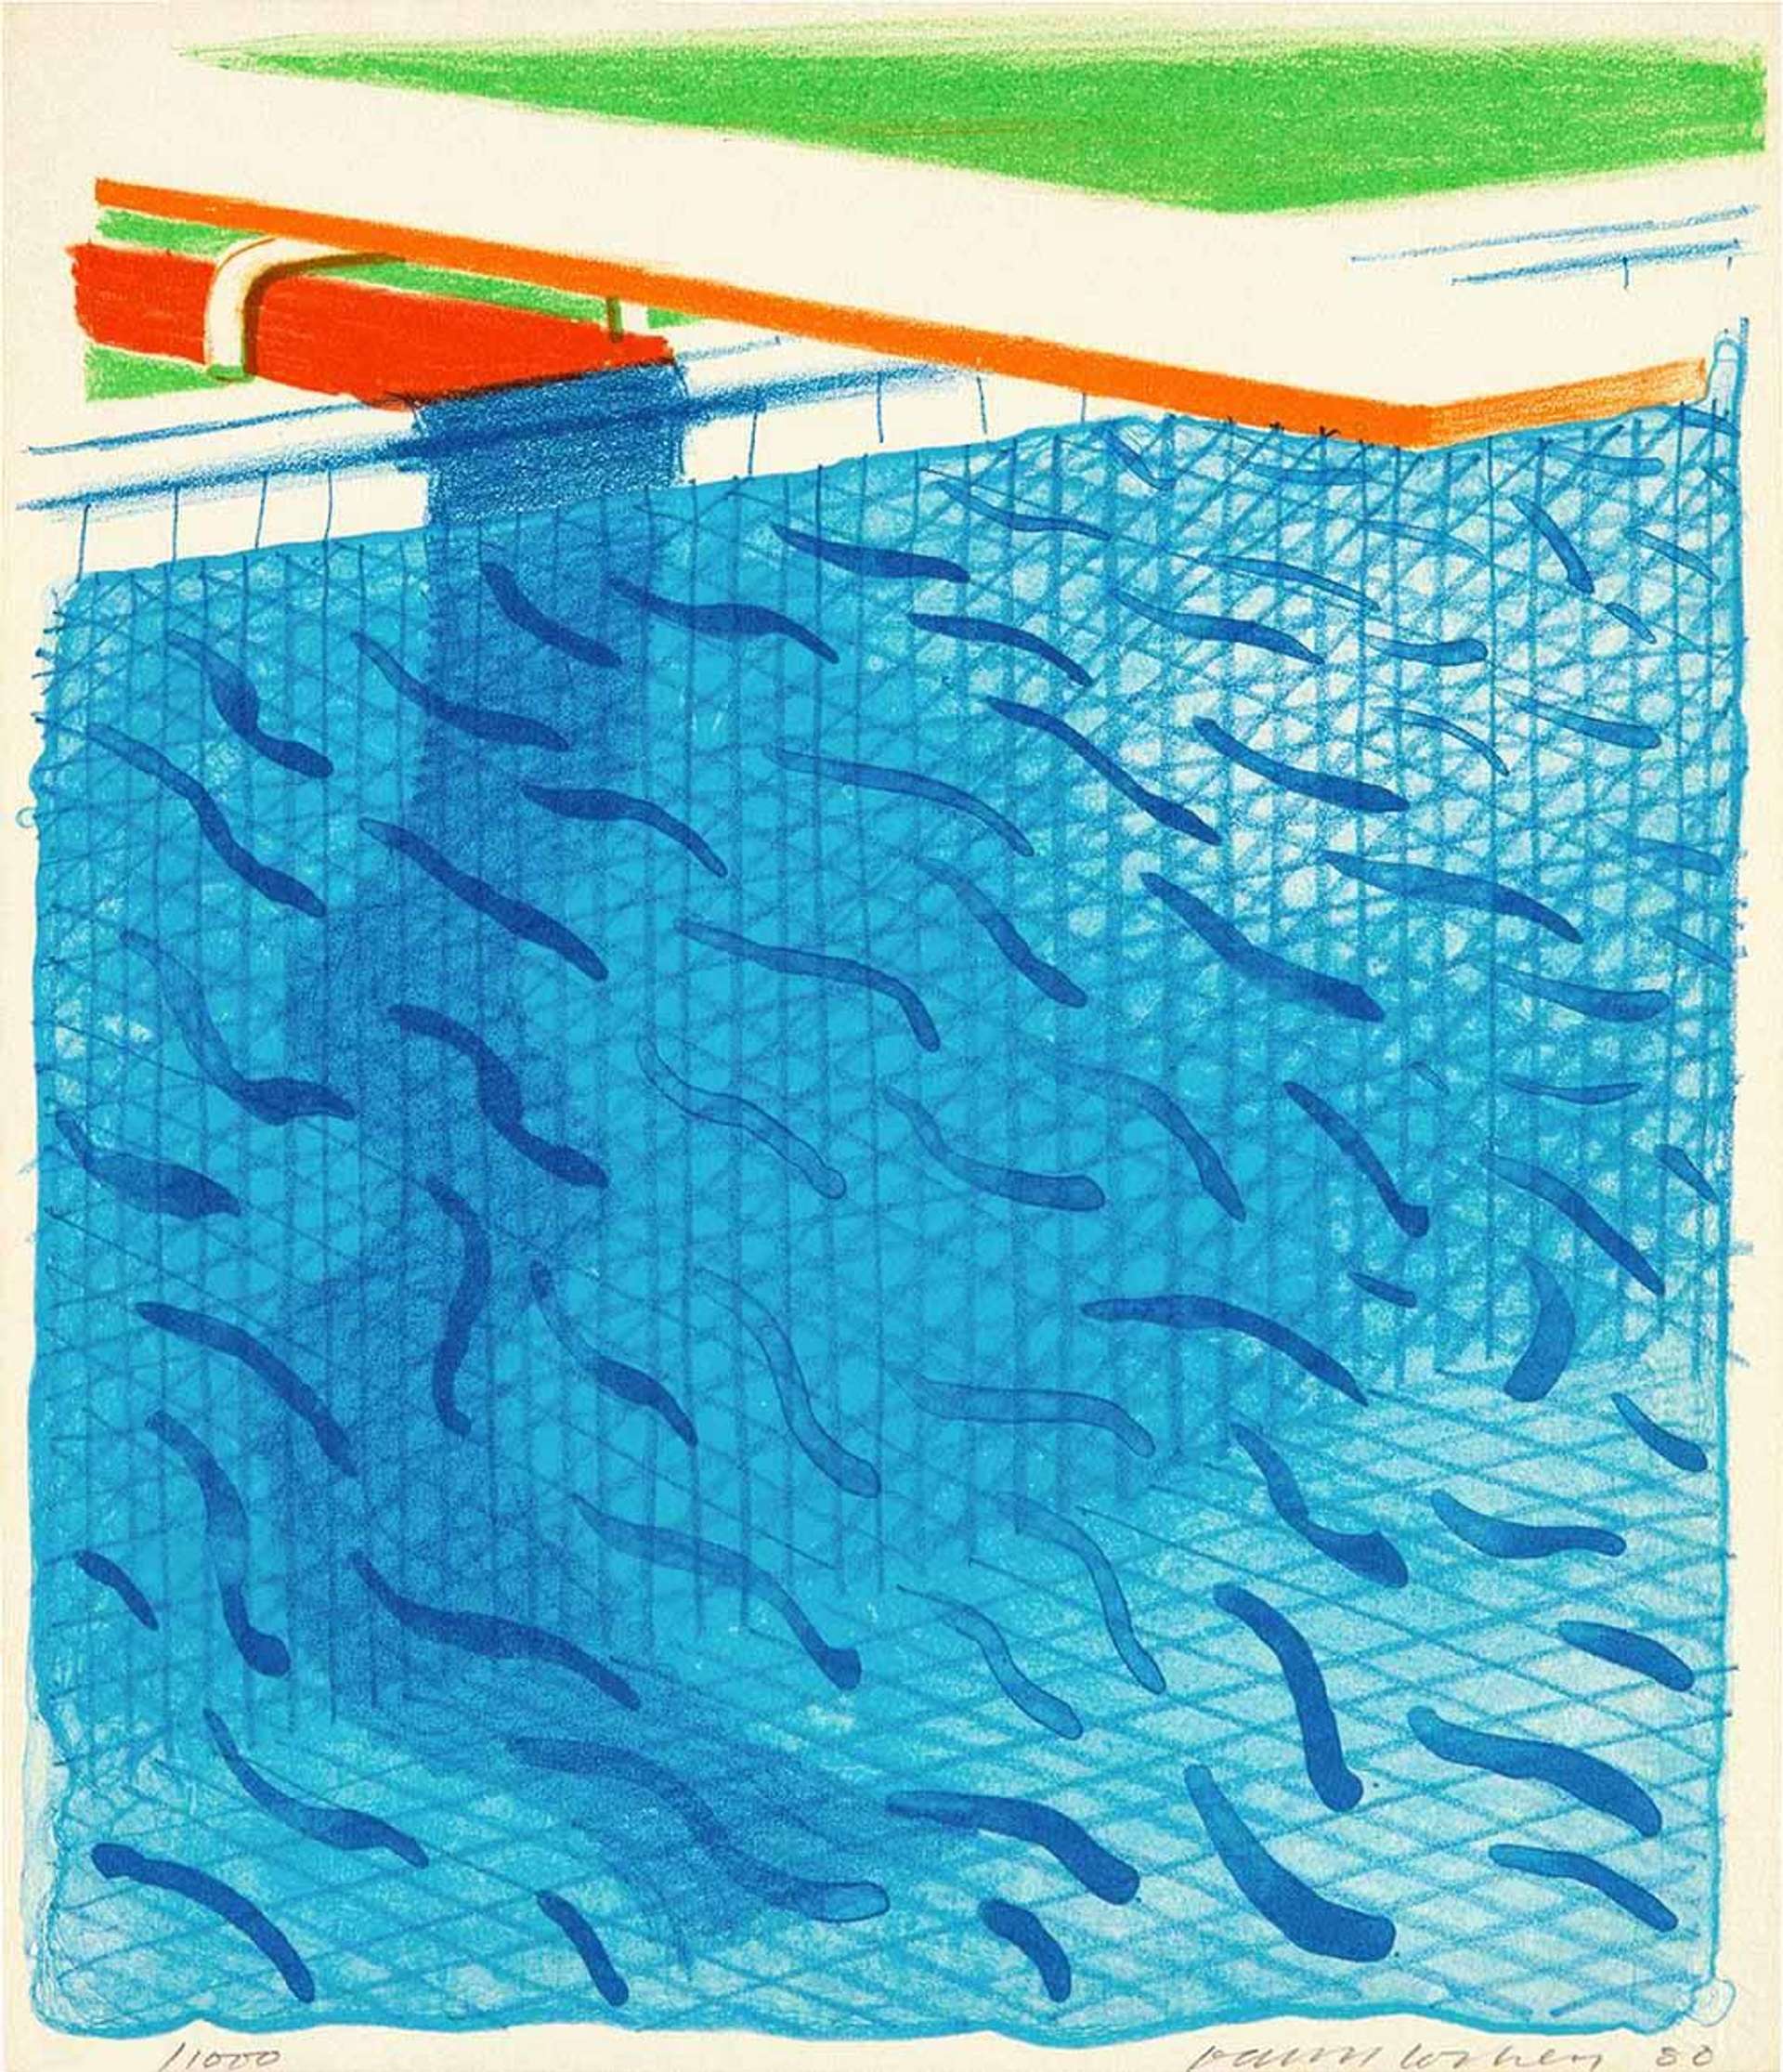 In this print, the water occupies almost the entire surface of the image, exhibiting simplicity of composition coupled with precise details and crisp linear outlines. An orange diving board is seen in the top left of the composition.